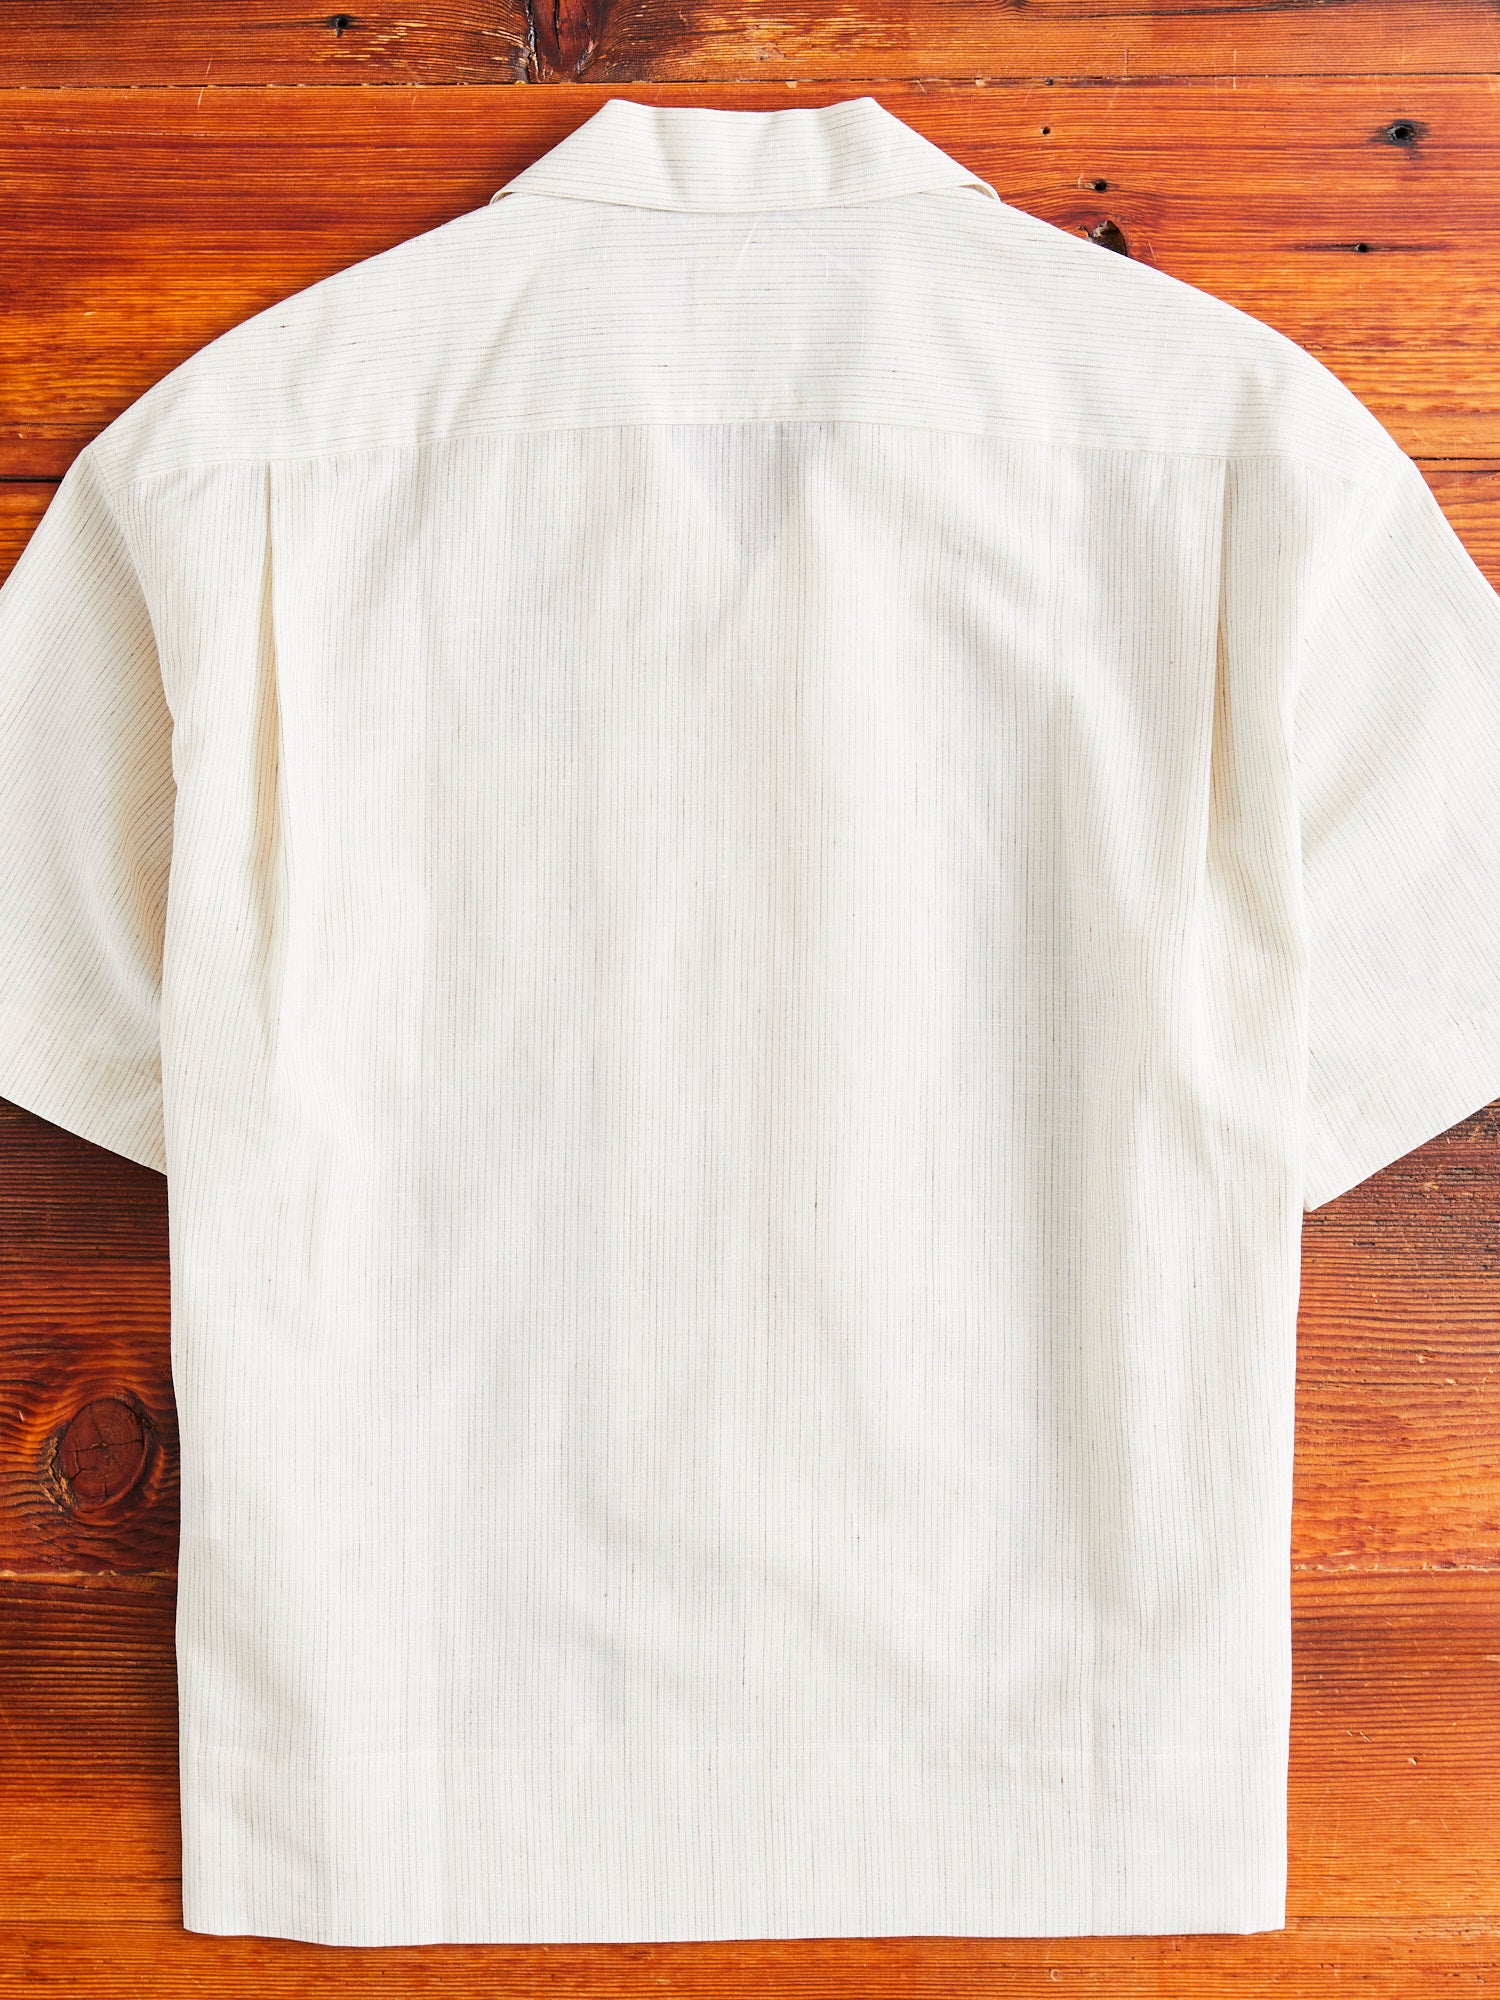 Copa Shirt S/S in Santome Ivory